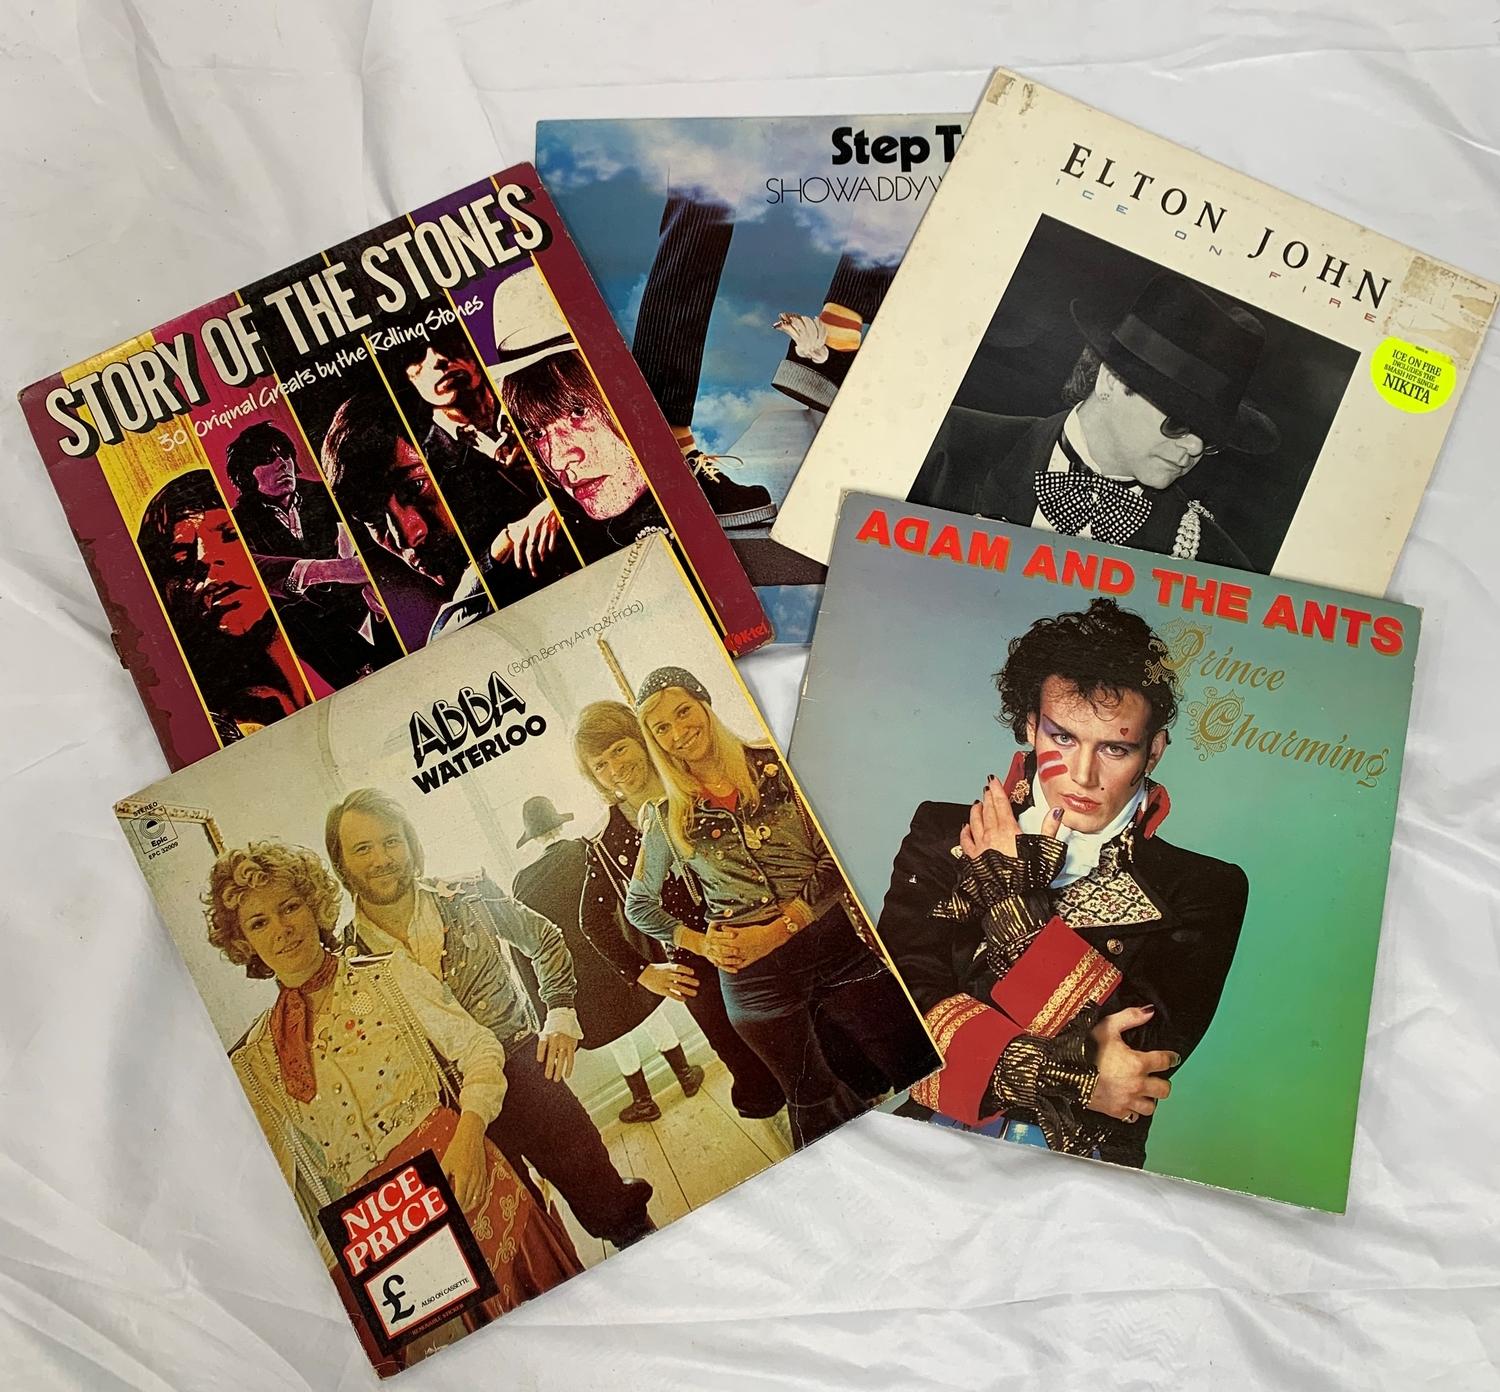 SELECTION OF VINYL LP RECORDS including The Clash, Rolling Stones, Adam And The Ants, Abba,